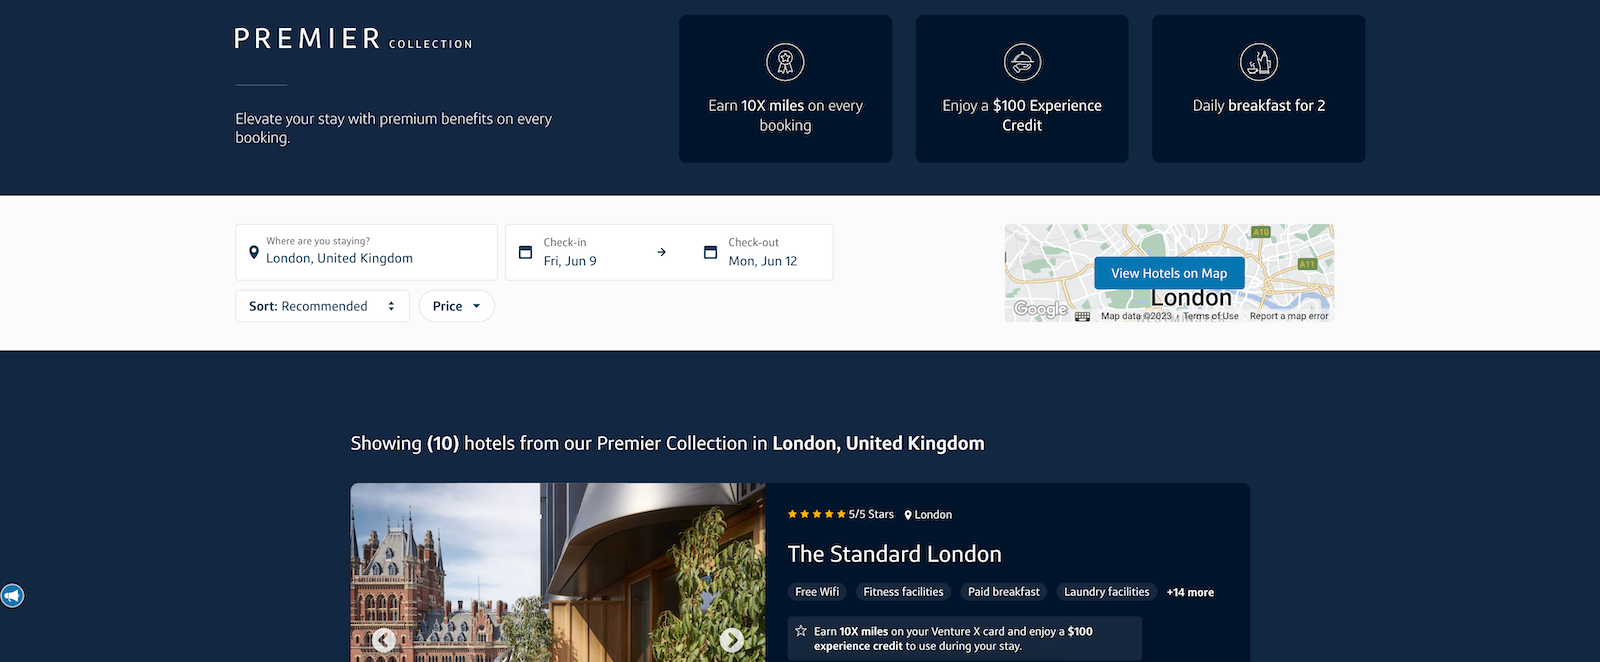 filtered hotel results for London with Premier Collection